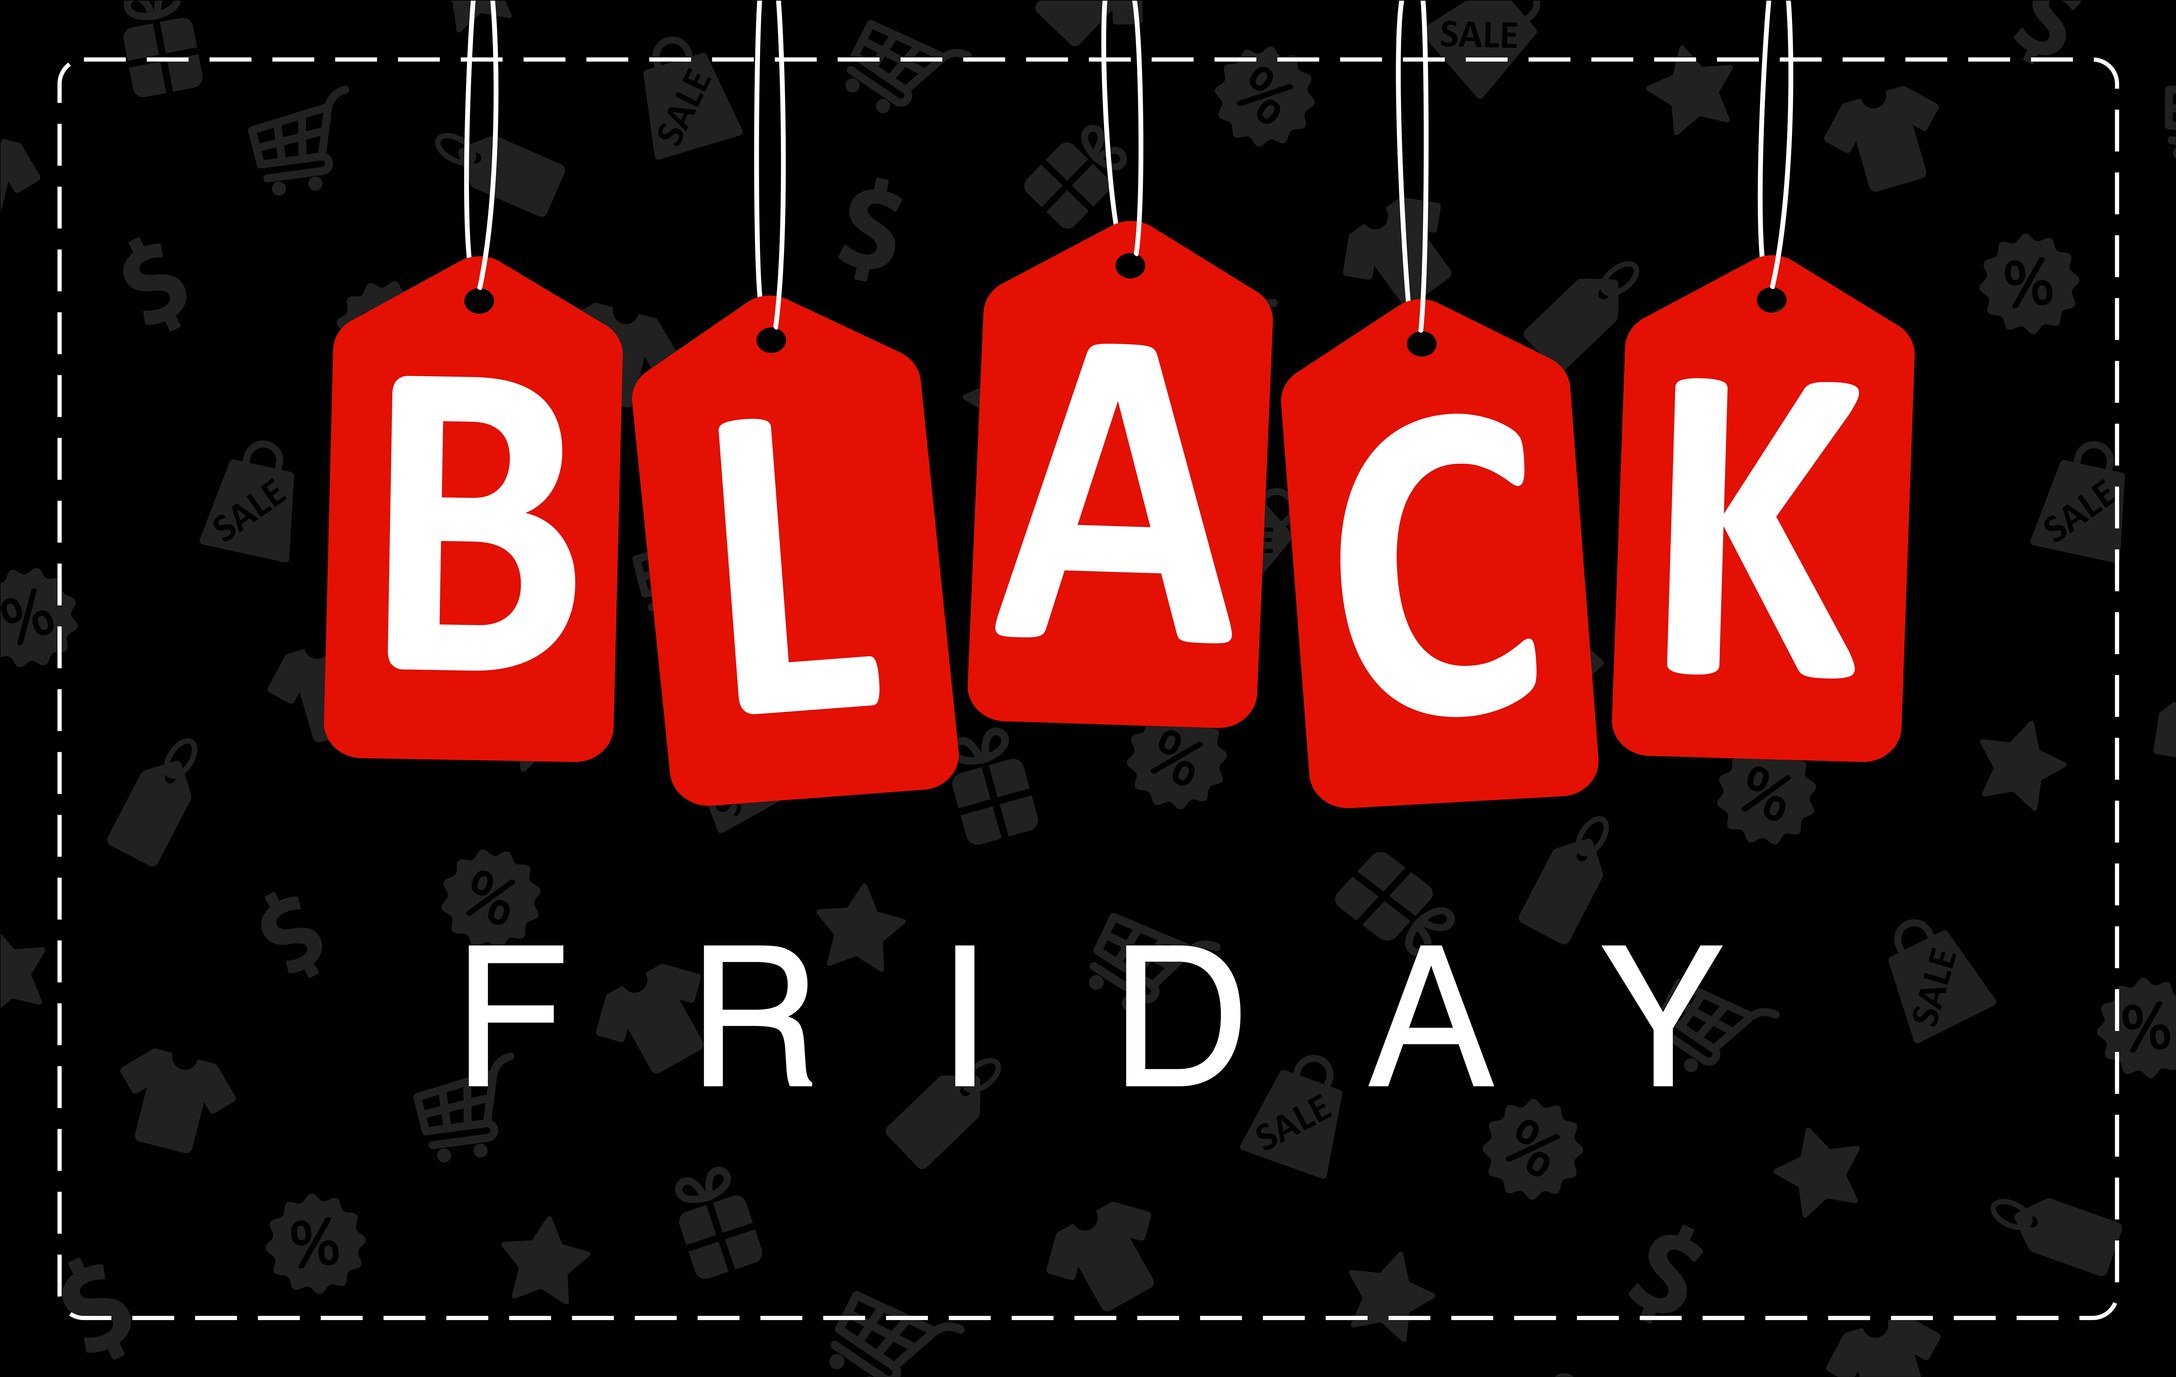 Black Friday / Cyber Monday 2018 Save Big with these Deals